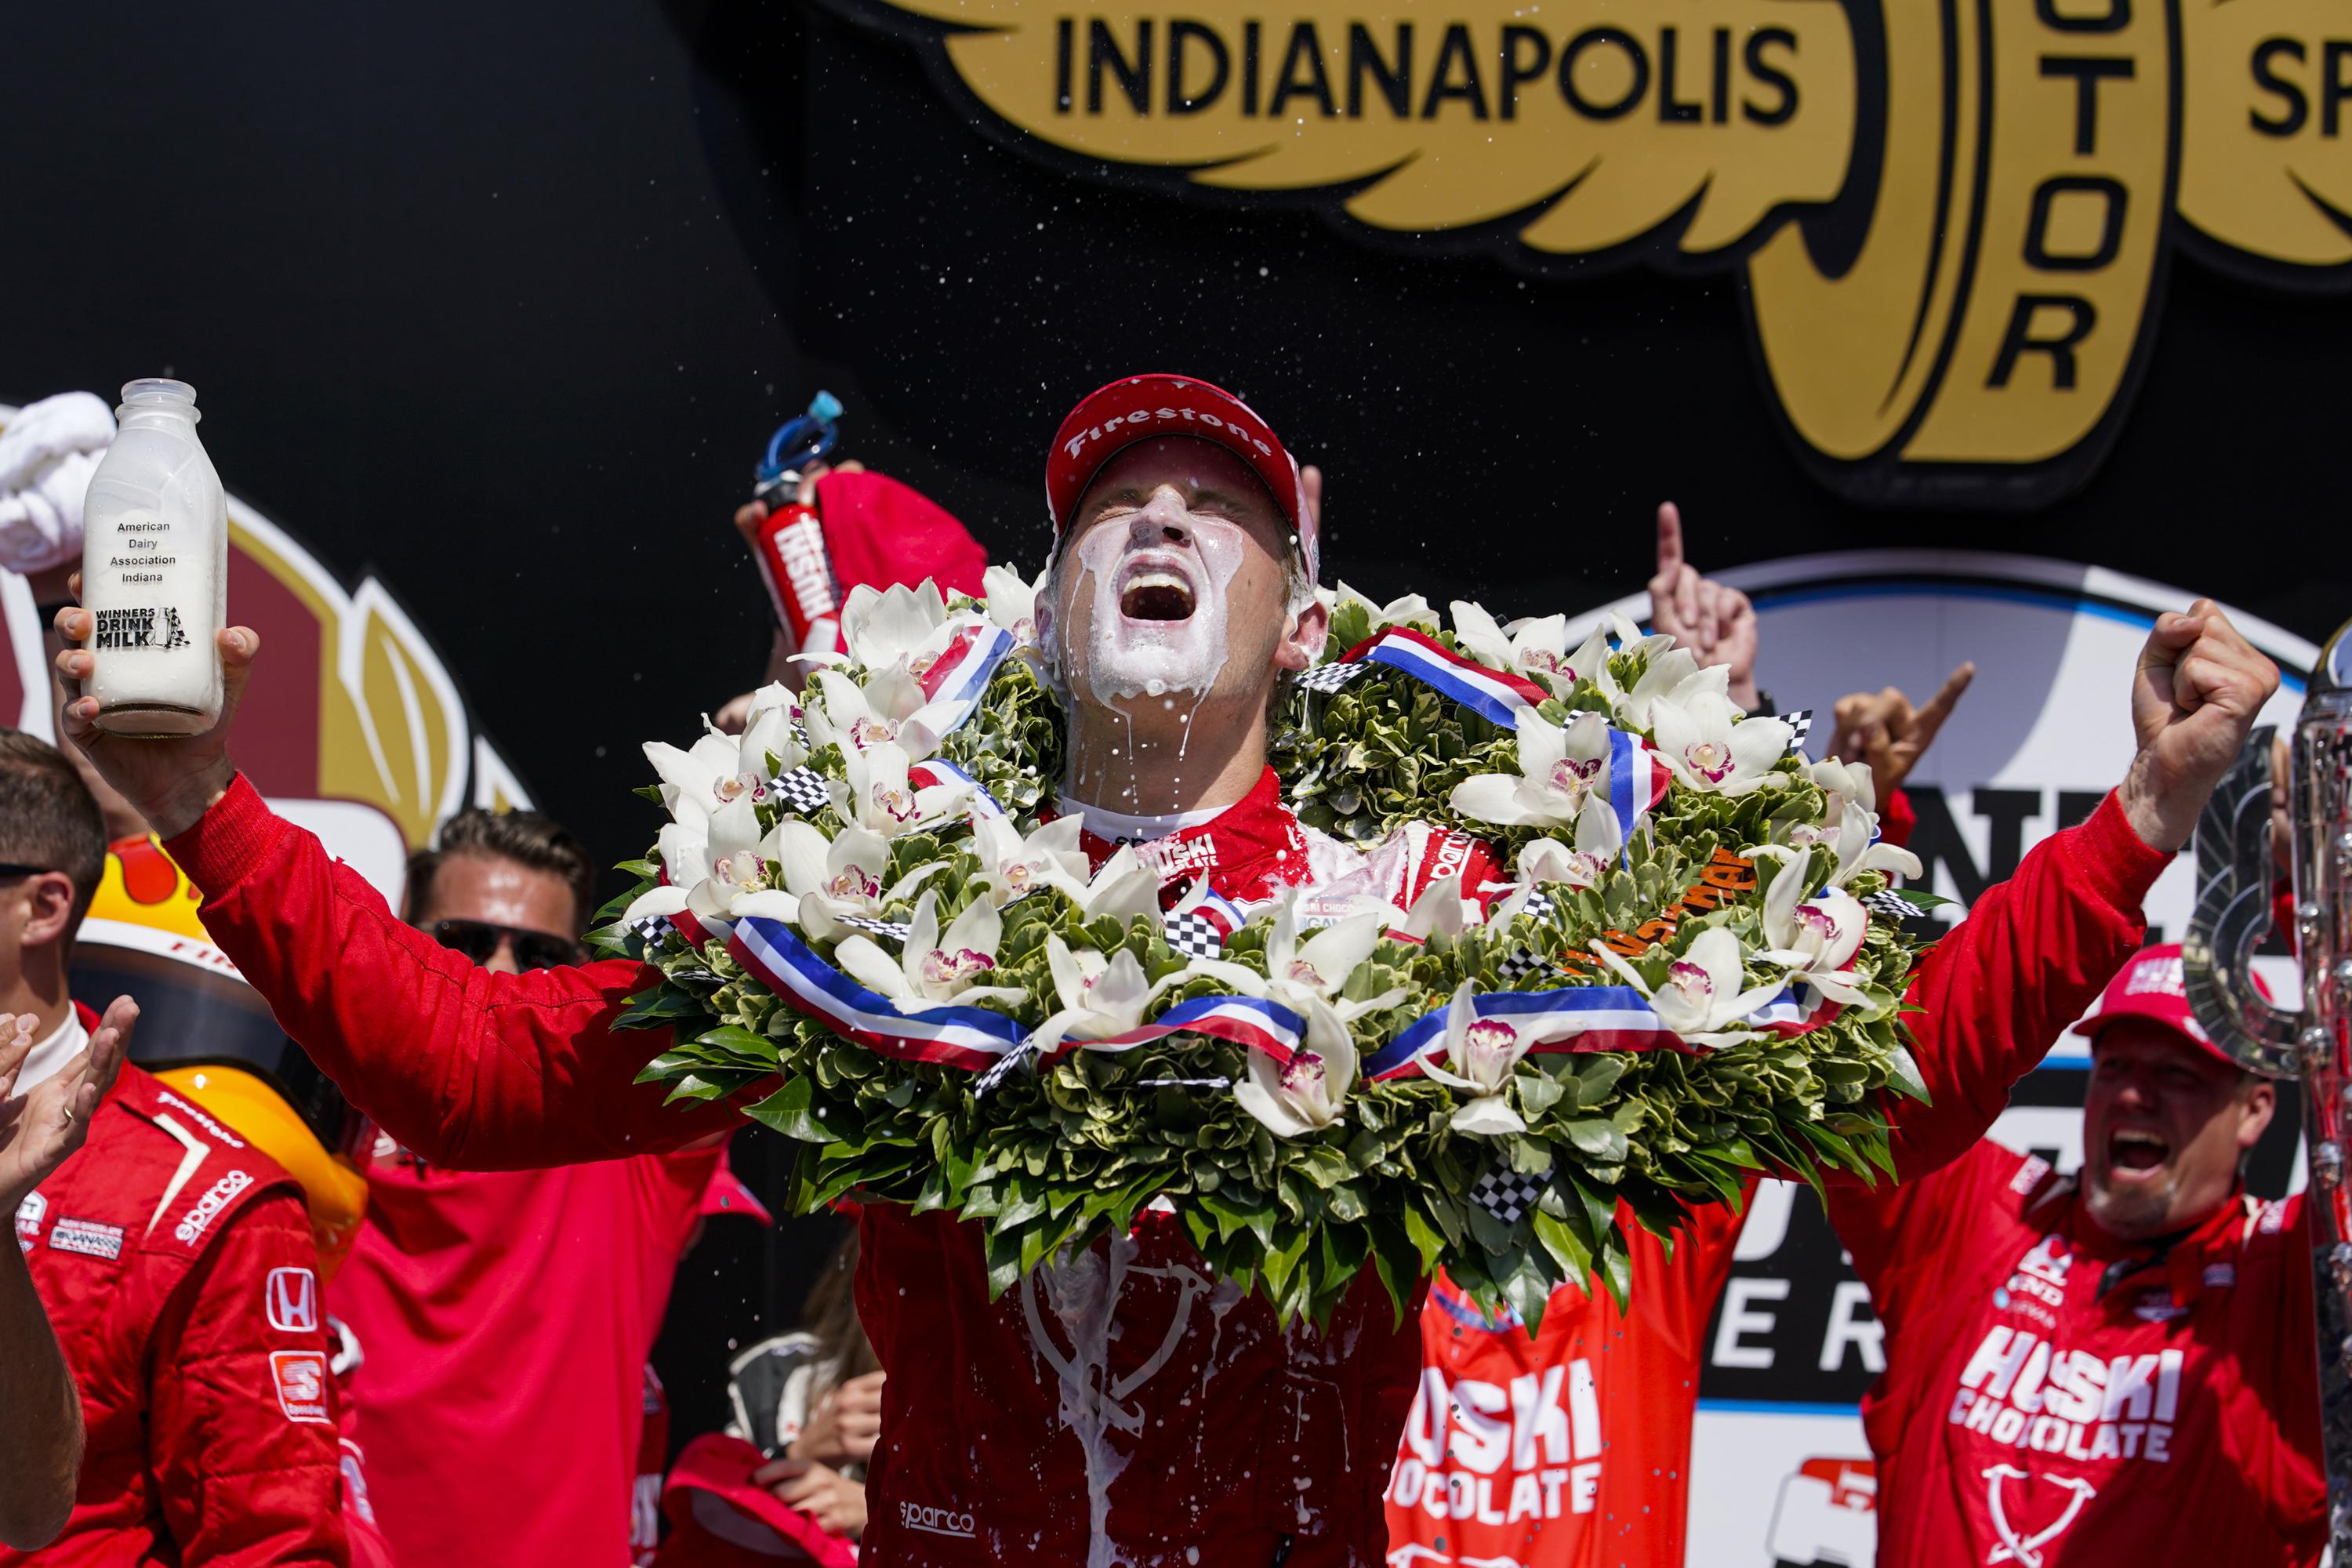 Sweden’s Ericsson gives Ganassi another Indy 500 victory